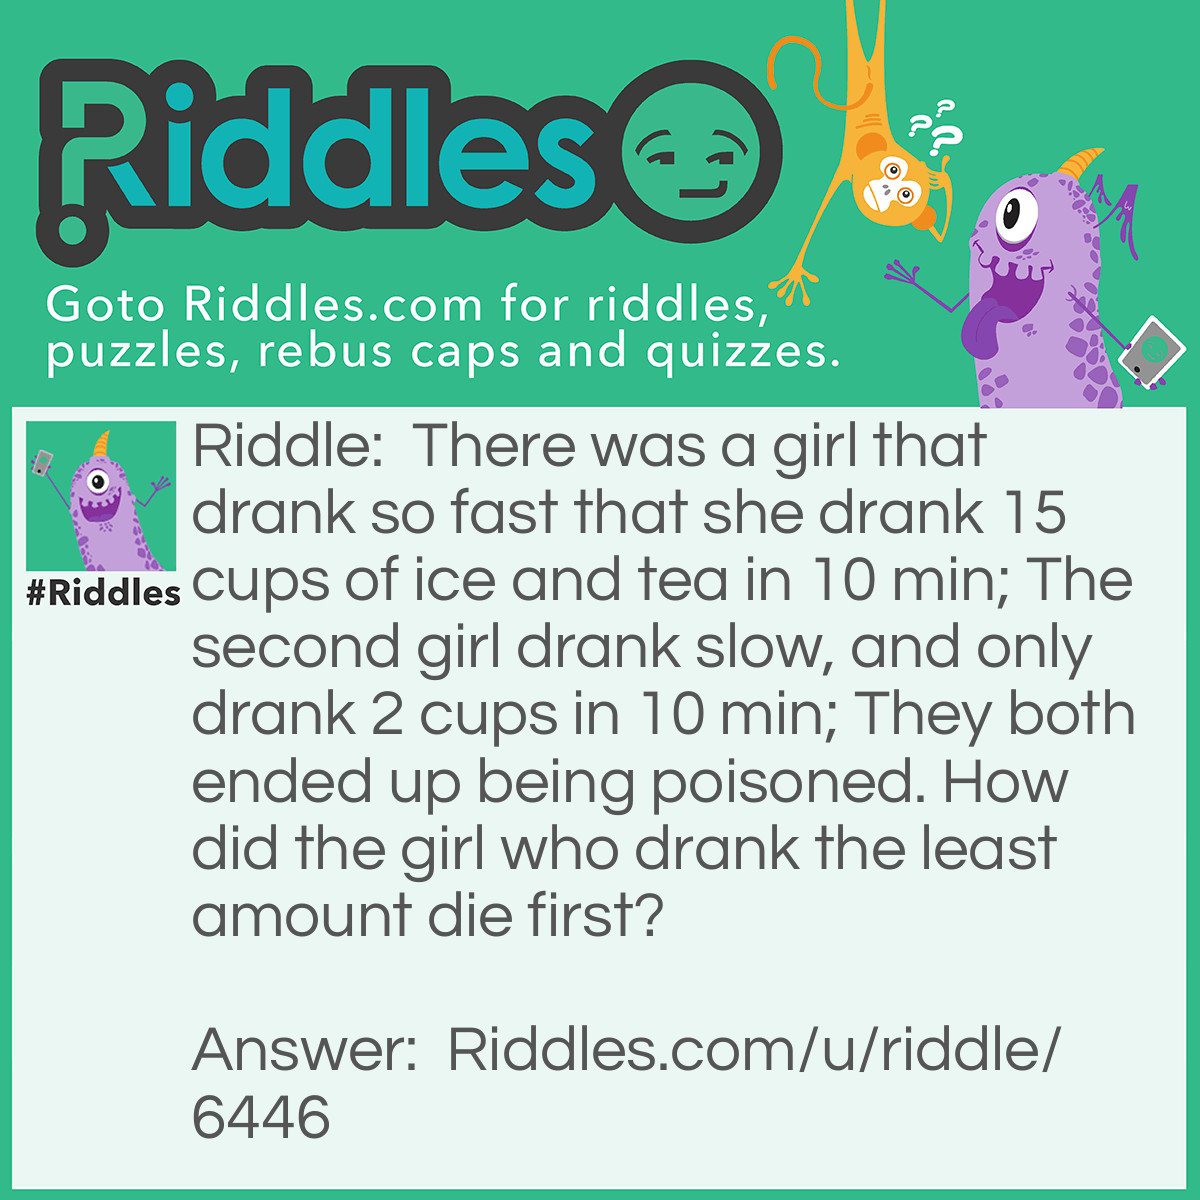 Riddle: There was a girl that drank so fast that she drank 15 cups of ice and tea in 10 min; The second girl drank slow, and only drank 2 cups in 10 min; They both ended up being poisoned. How did the girl who drank the least amount die first? Answer: The poison was in the ice, therefore, the girl who drank less let the ice have more time to melt, which had a result in poisoning the drink, too, as the girl who drank less did not.